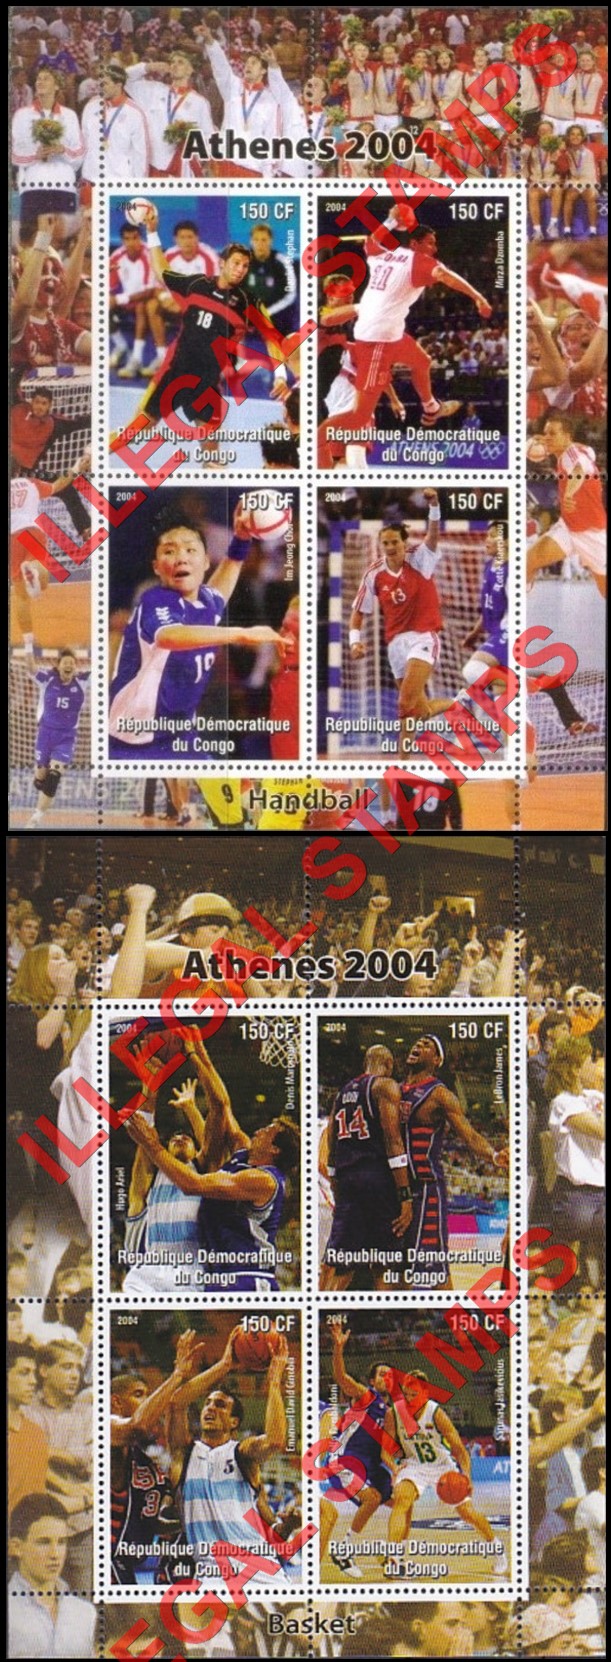 Congo Democratic Republic 2004 Olympic Games in Athens Illegal Stamp Souvenir Sheets of 4 (Part 4)